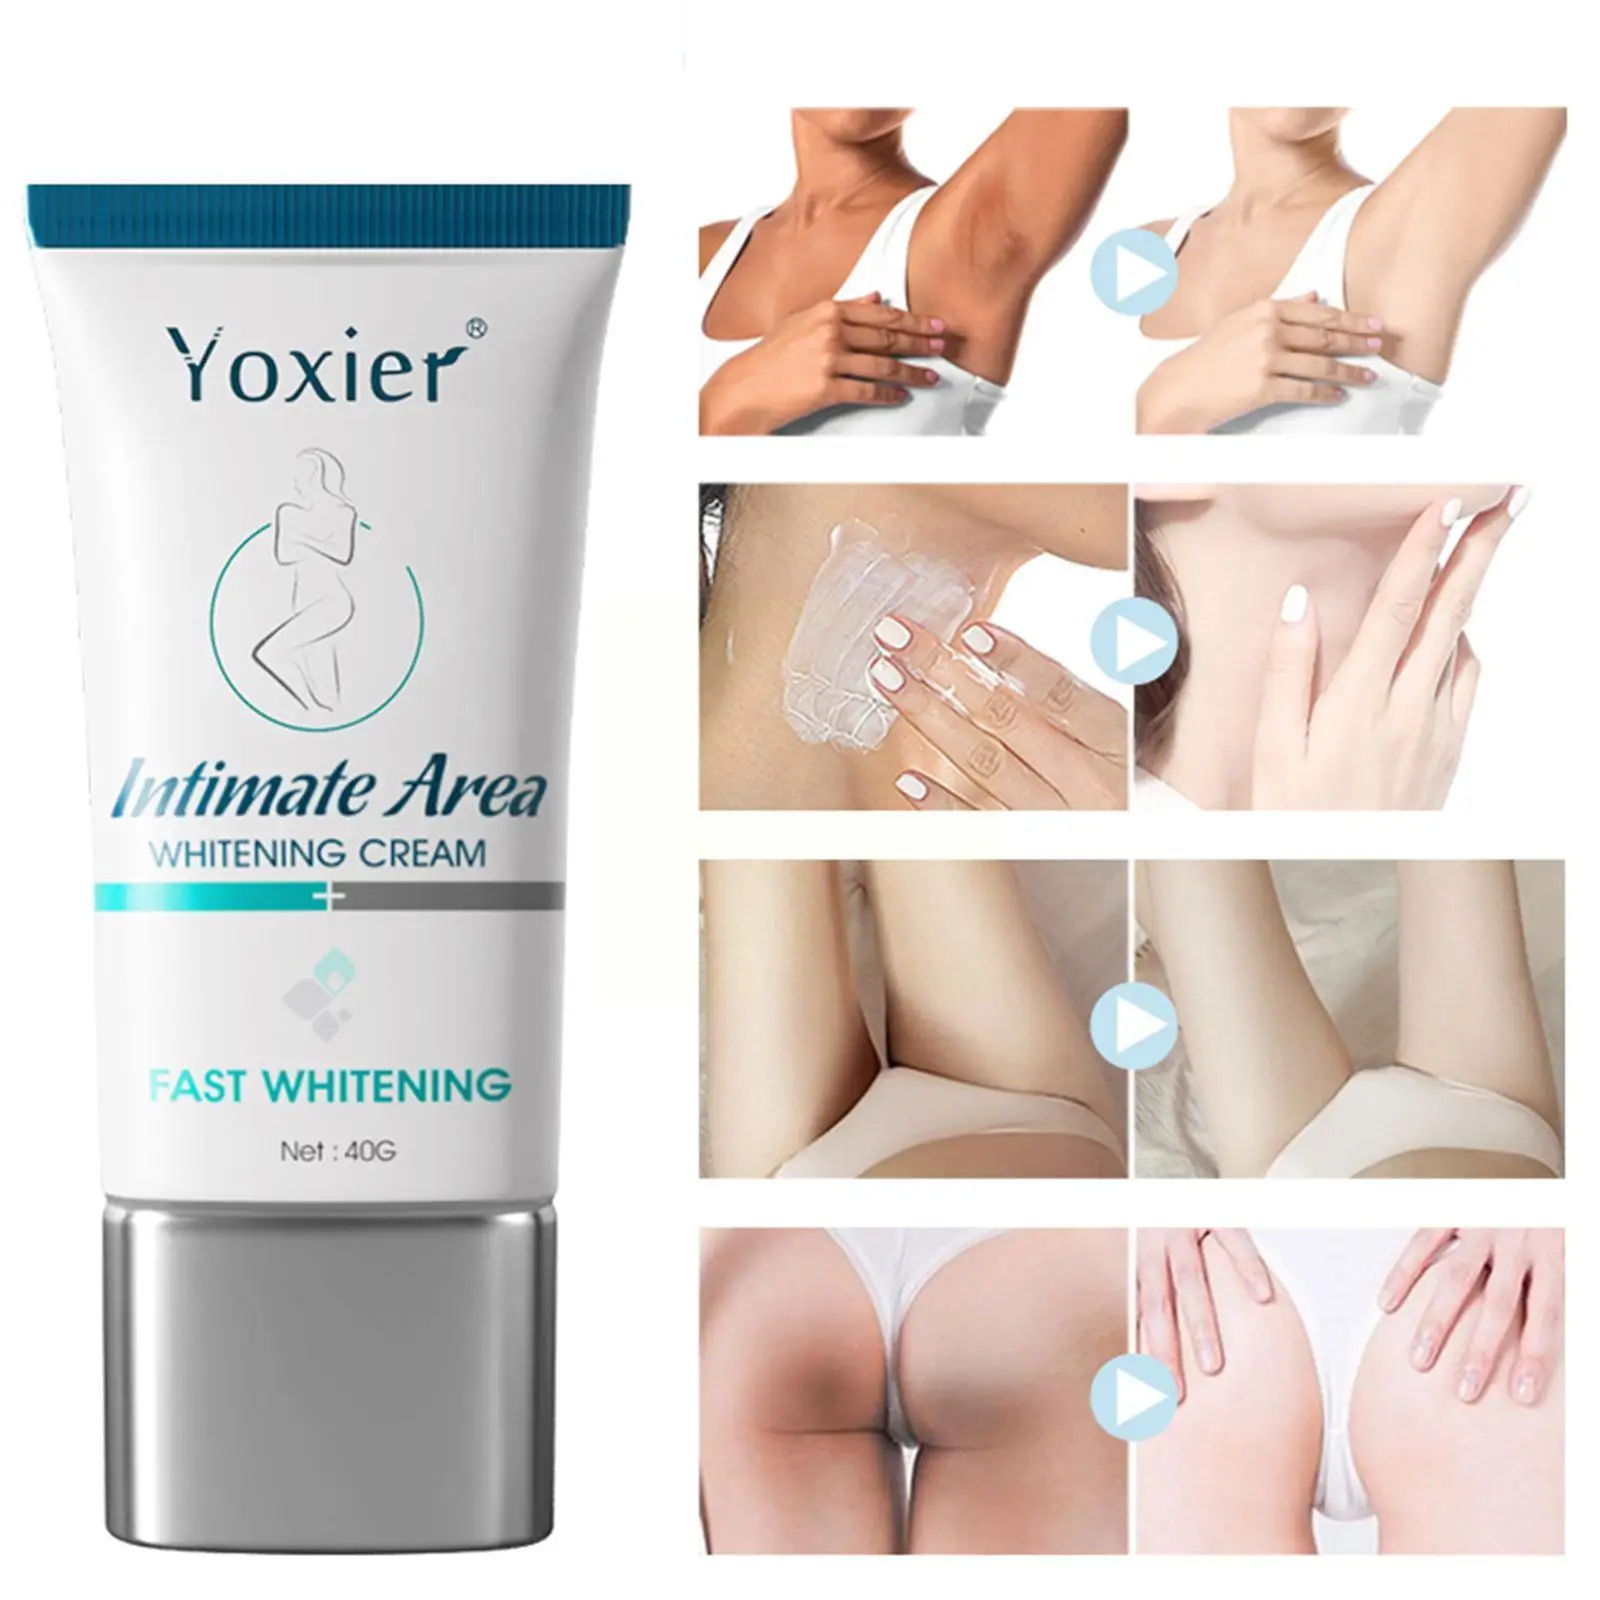 

1PCS Whitening Cream Improve Arm Armpit Ankles Elbow Parts Nipple Brighten Body Bodys Dull Private Knee Whitenings Care Y6Z4